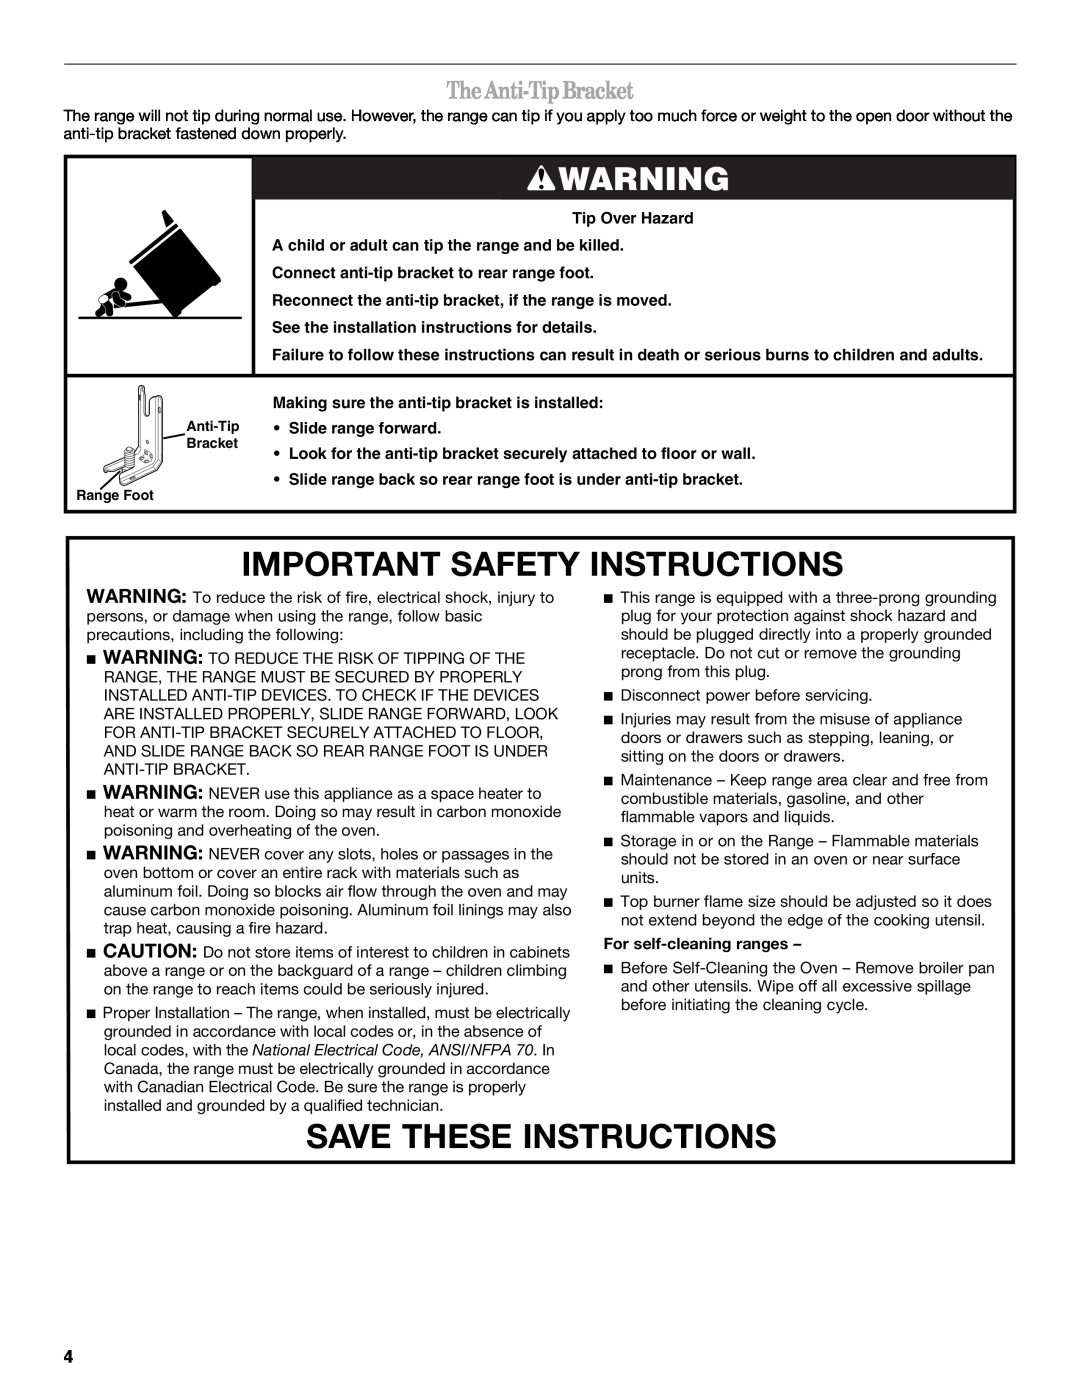 Whirlpool GGG390LX, GGG388LX The Anti-TipBracket, Important Safety Instructions, Save These Instructions, Tip Over Hazard 